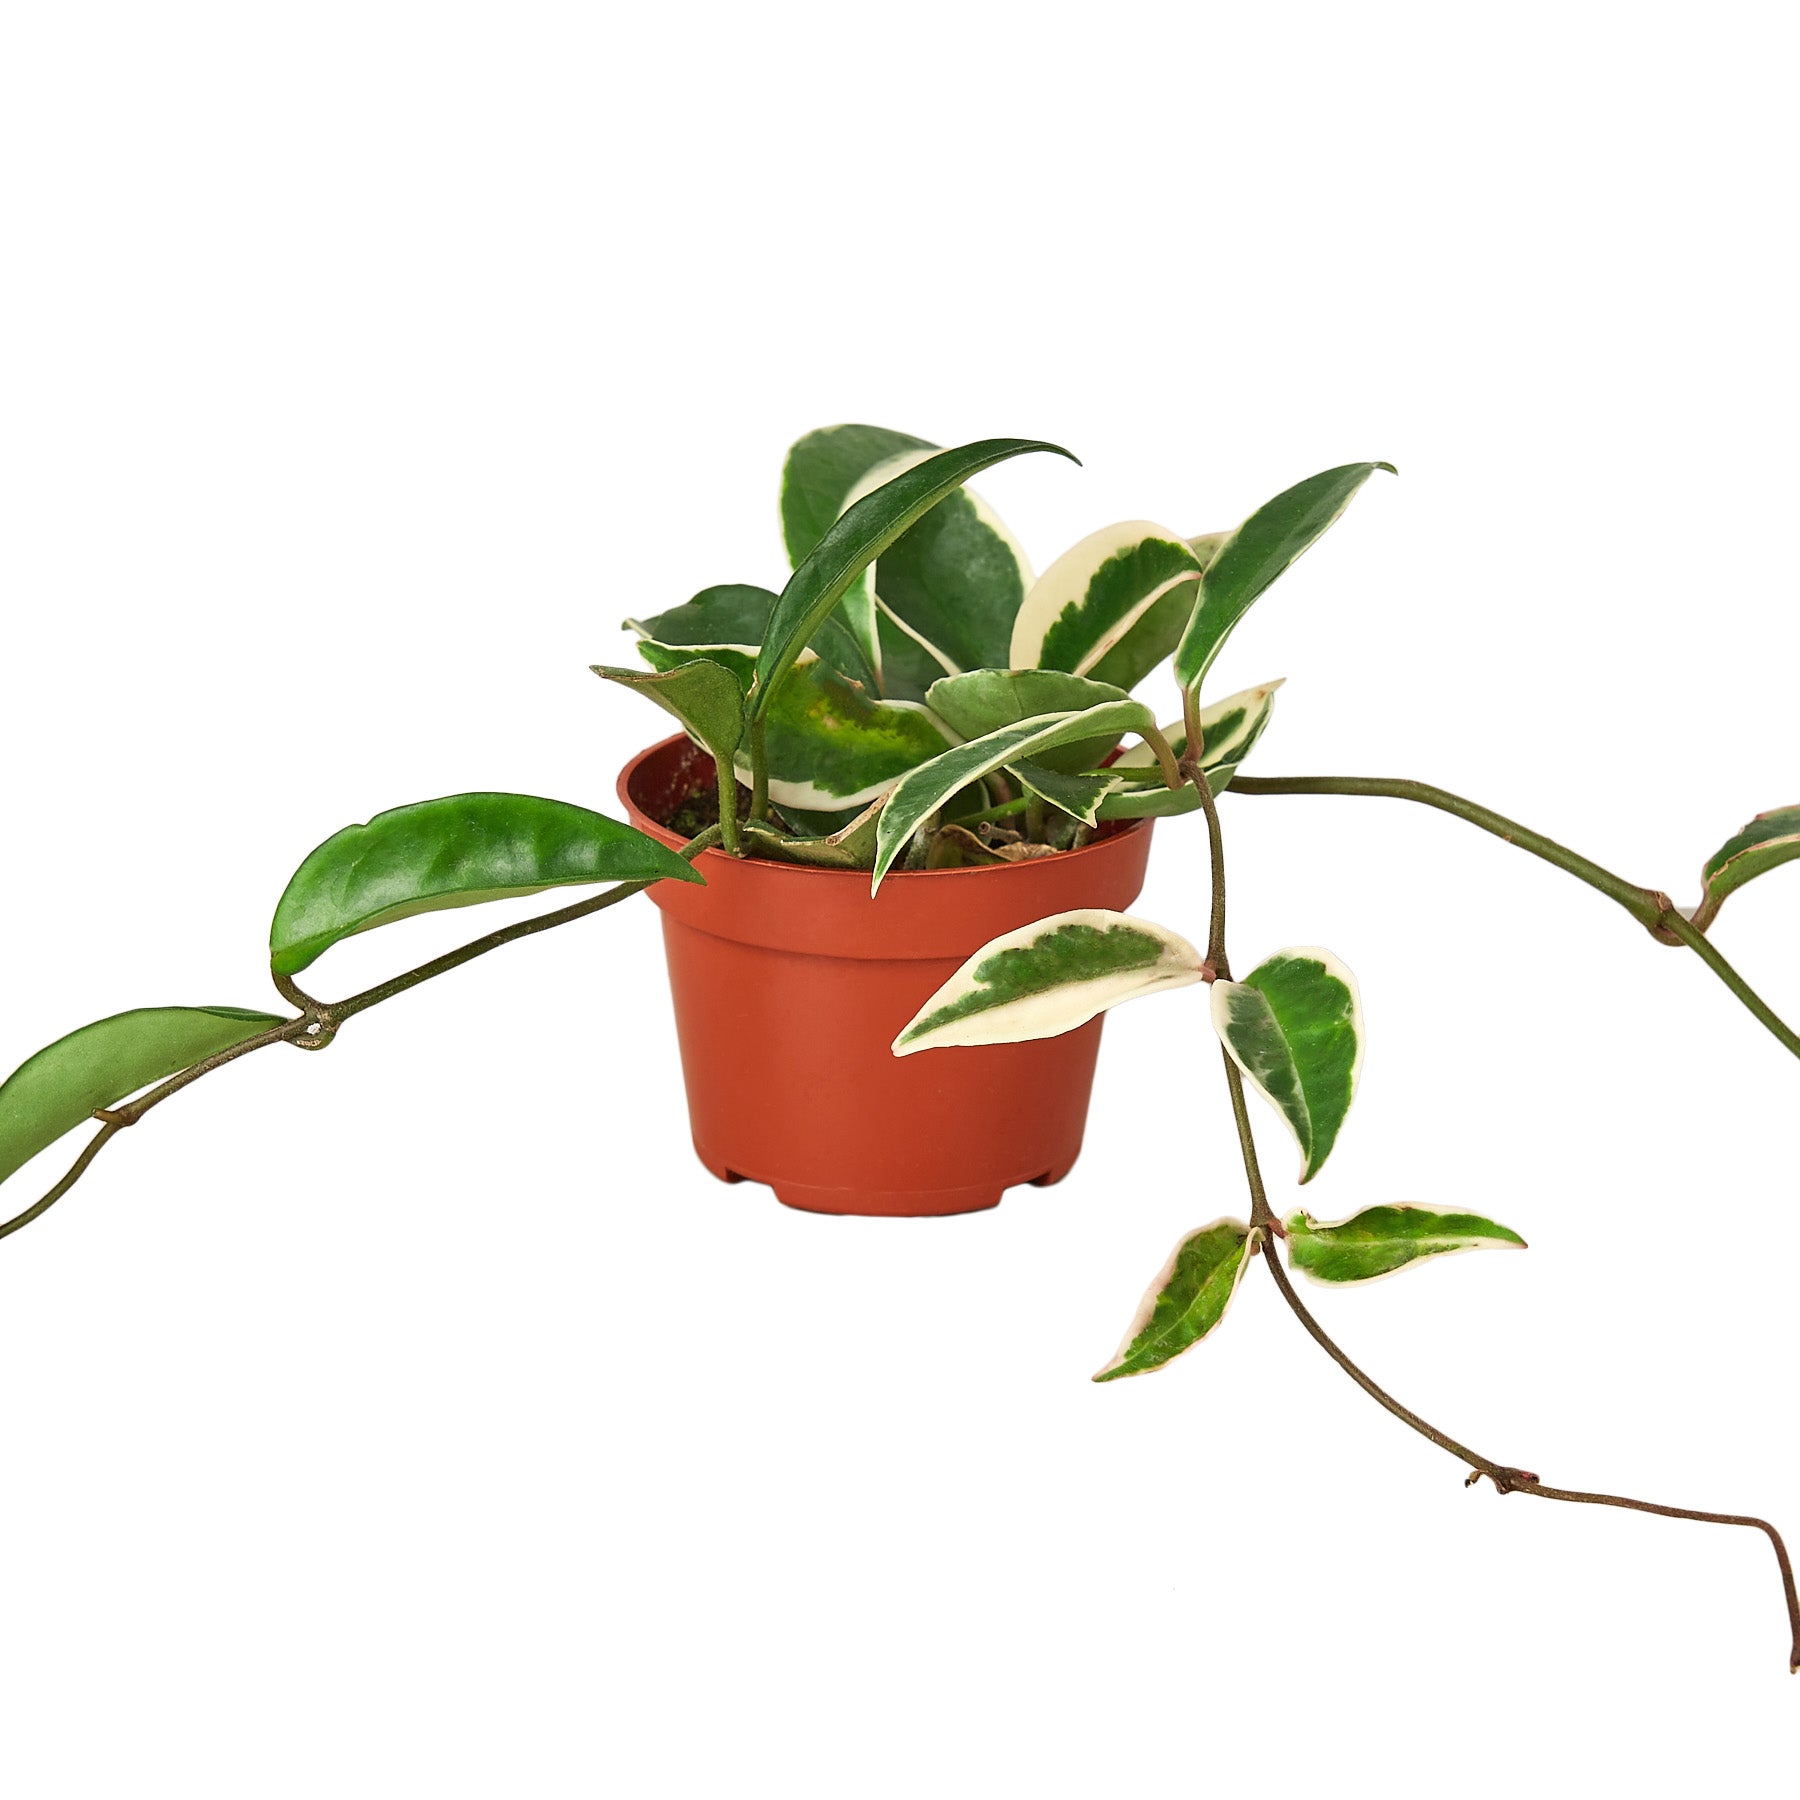 A plant in a pot on a white background at one of the best garden centers near me.